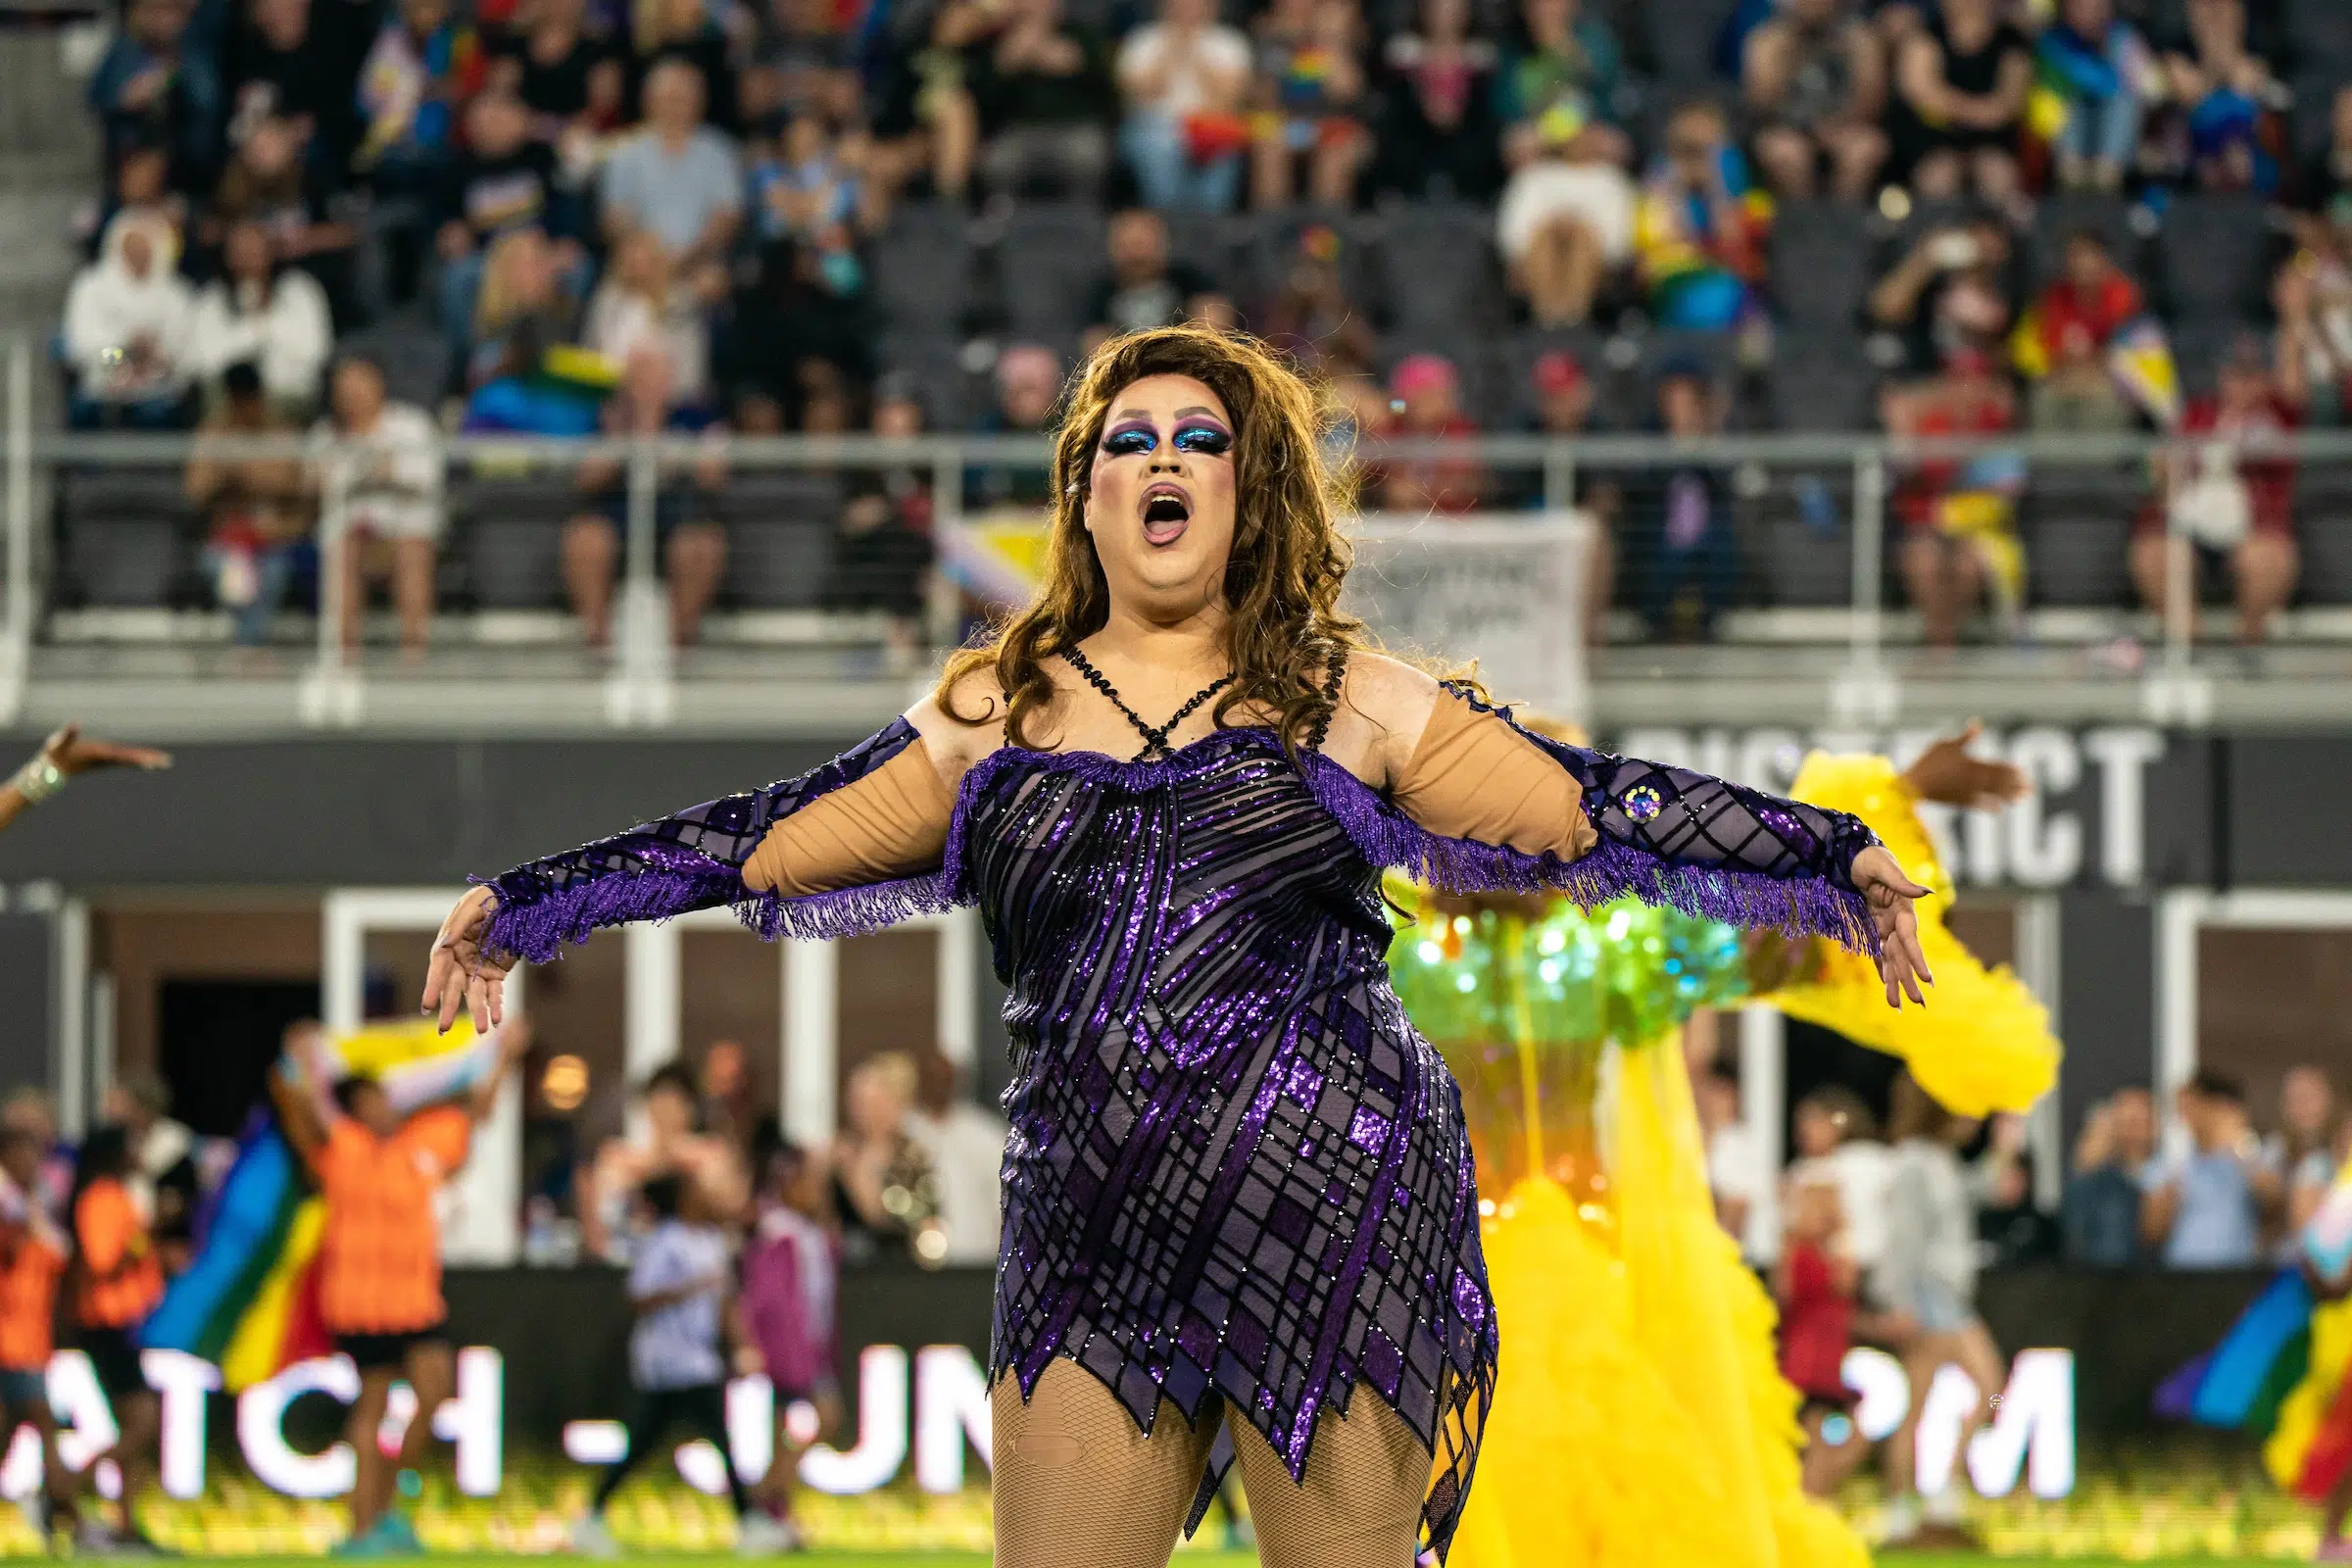 A drag queen in a purple and black sparkly dress belts out a song during a halftime performance.